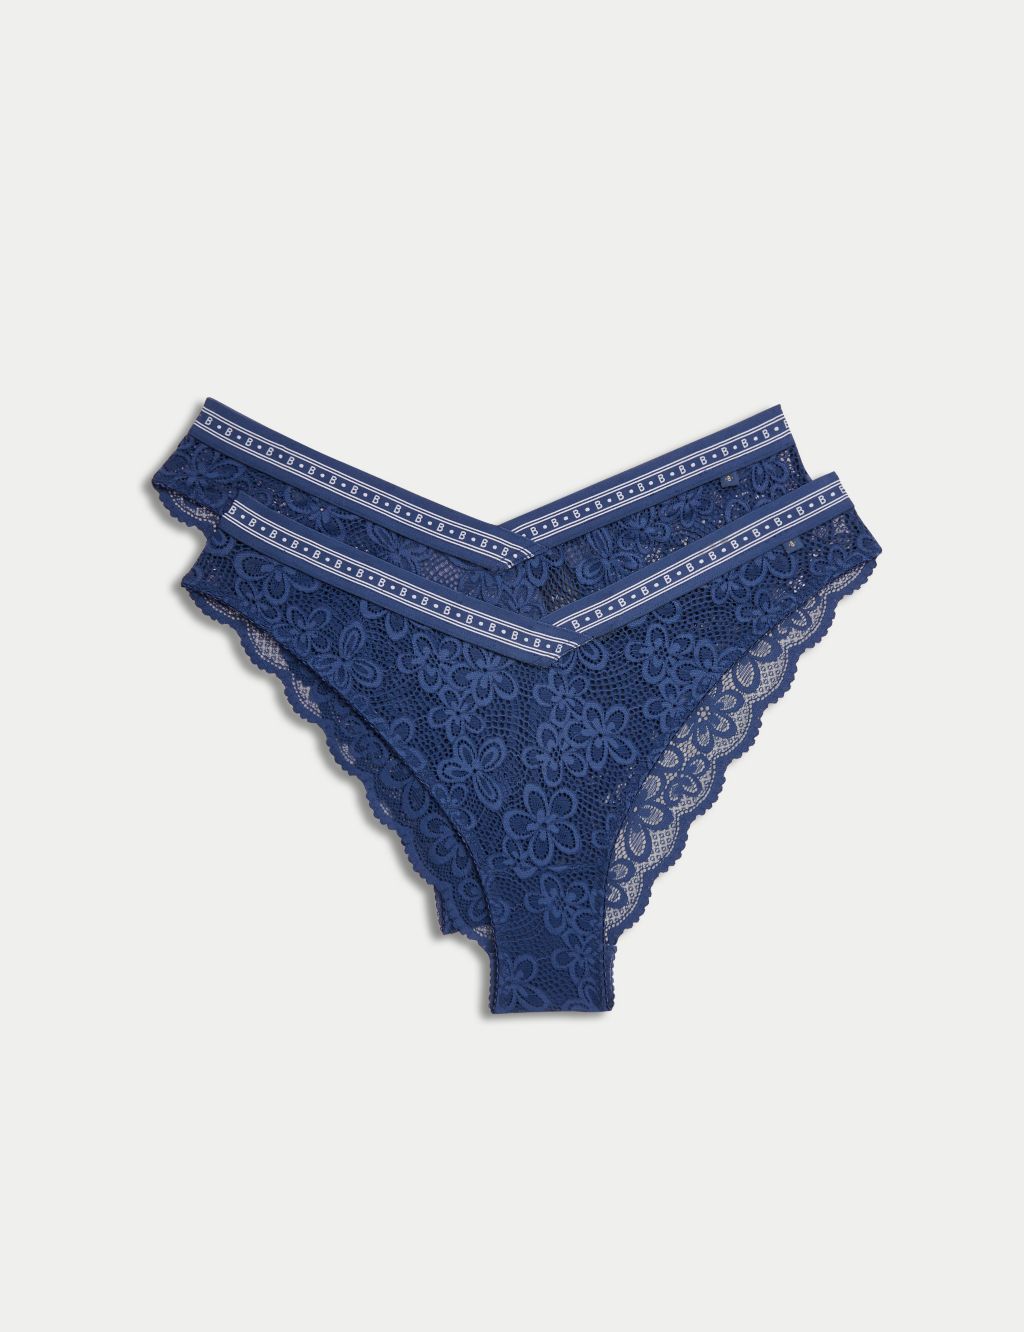 Lace full knickers navy blue La Redoute Collections Plus